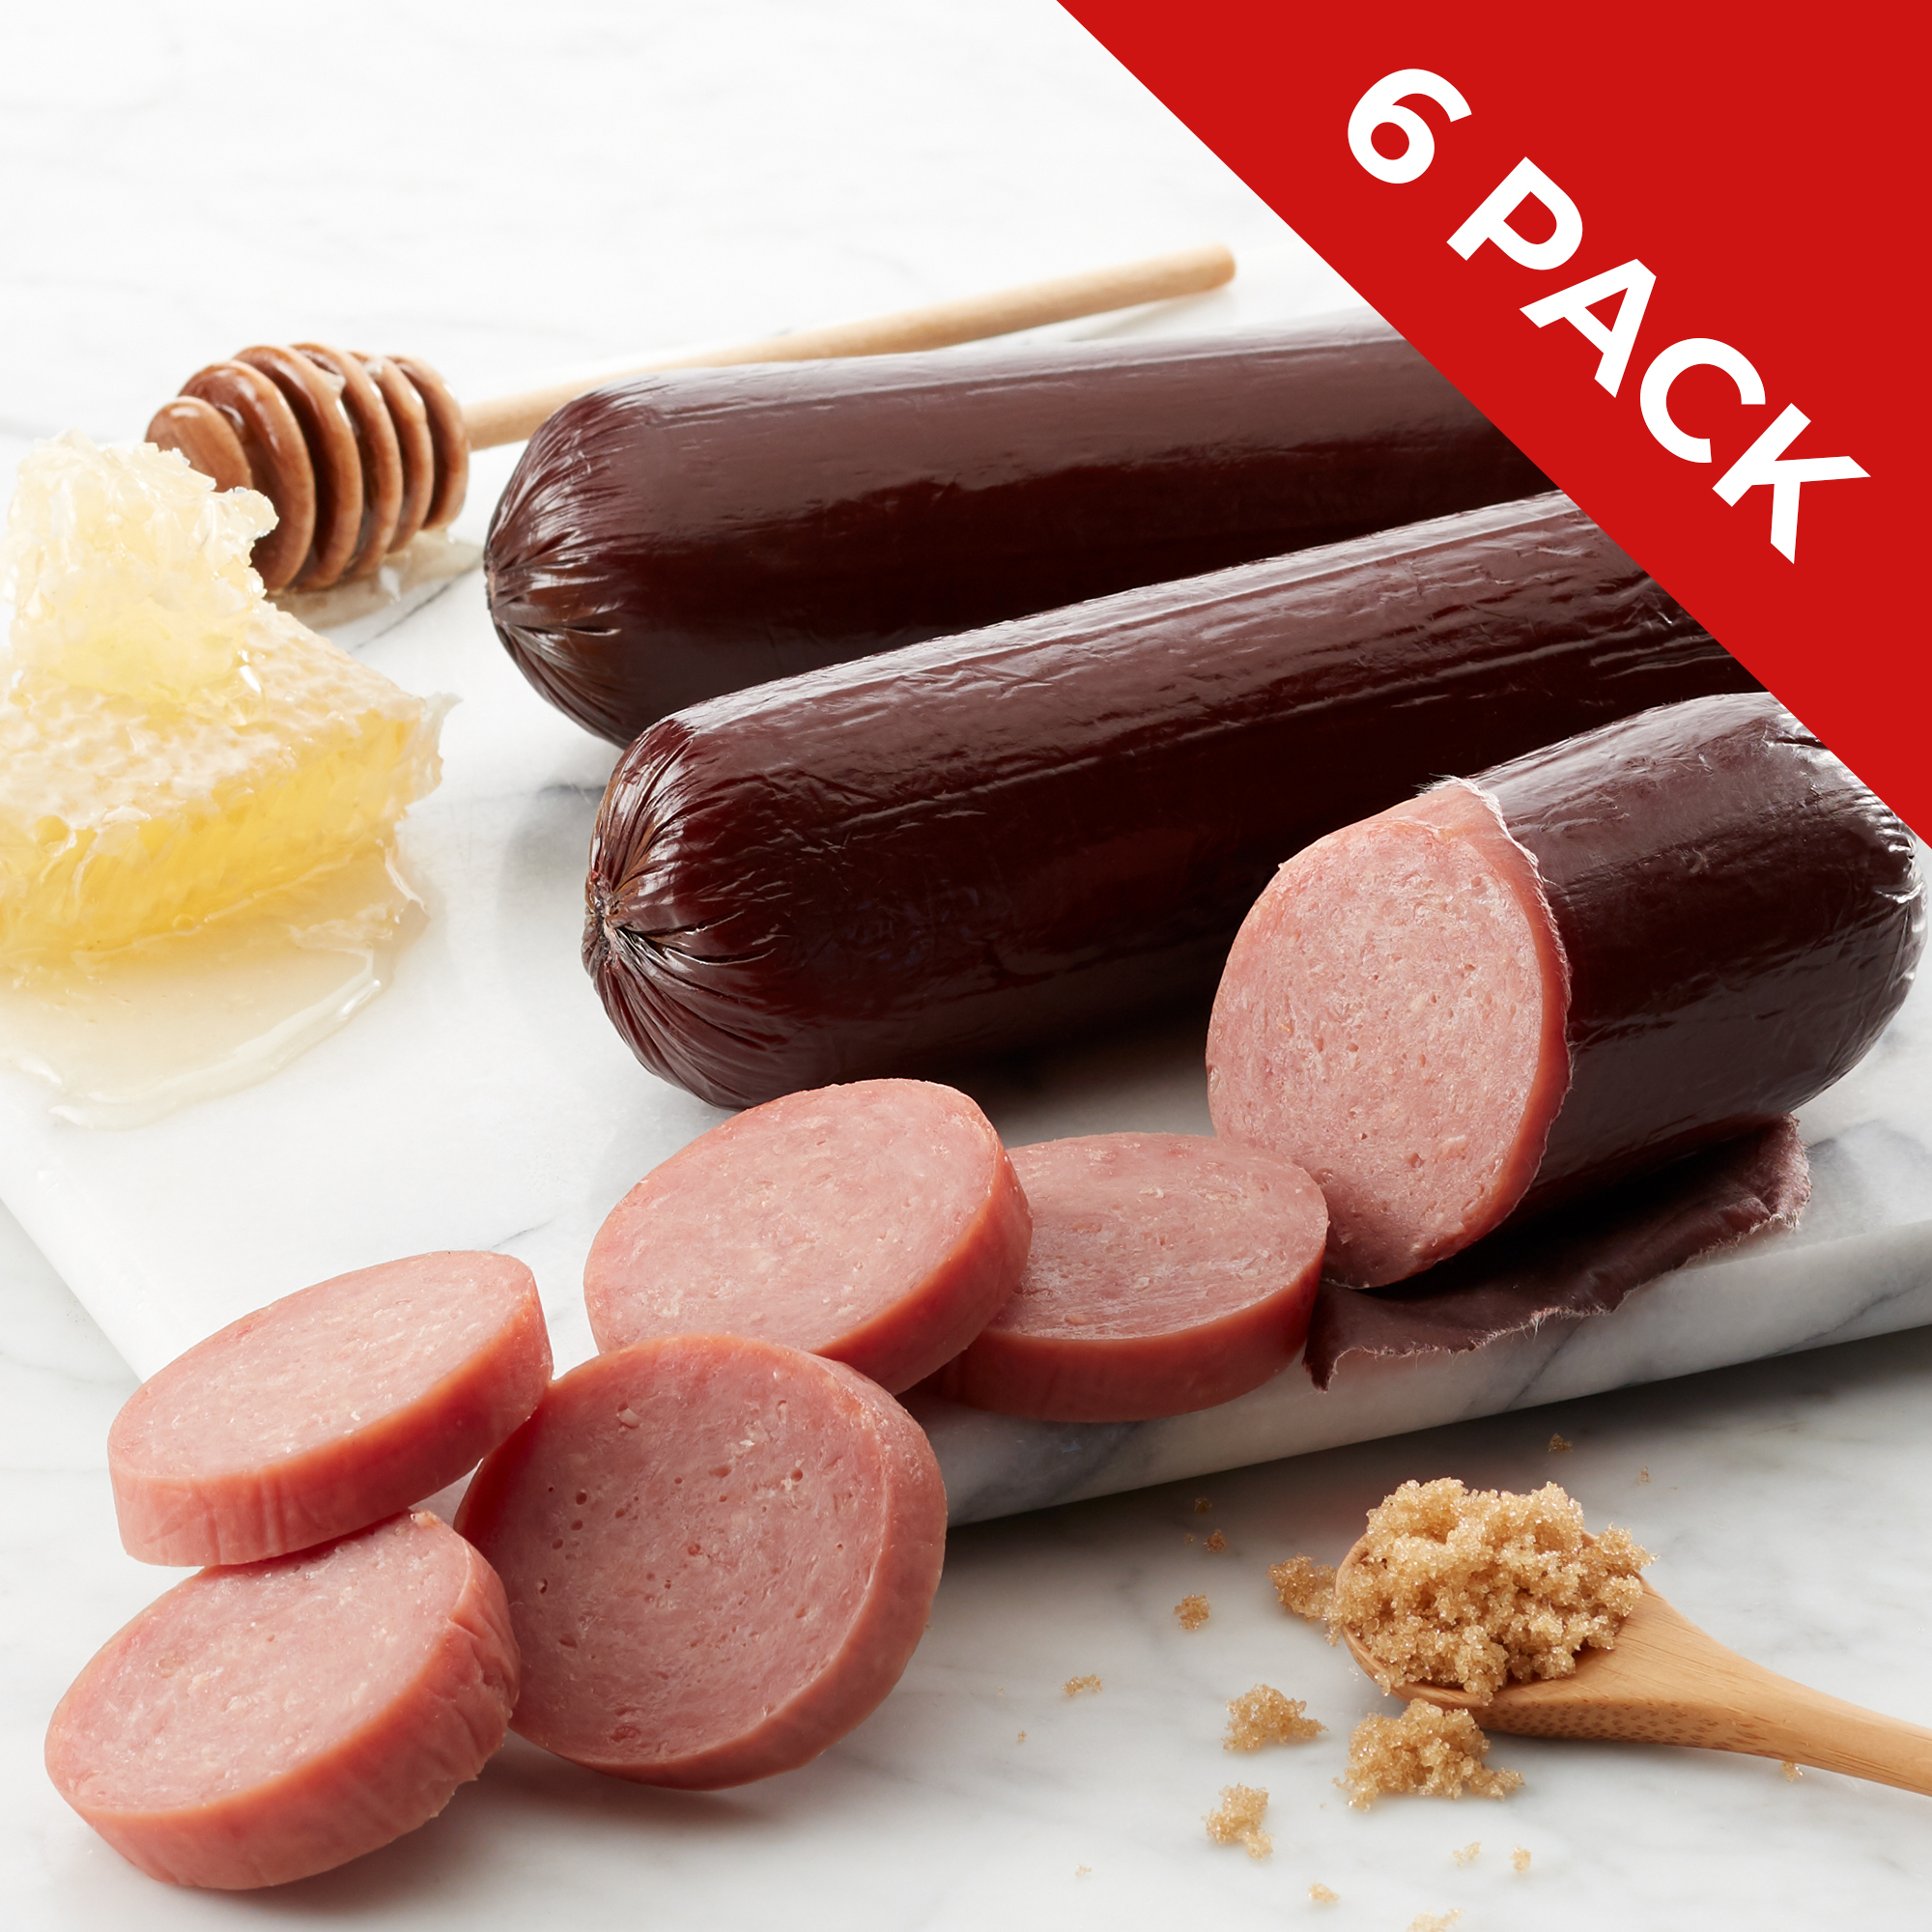 https://www.hickoryfarms.com/on/demandware.static/-/Sites-Web-Master-Catalog/default/dw3eda2d3a/images/products/6-pack-sweet-and-smoky-turkey-summer-sausage-031360-1.jpg